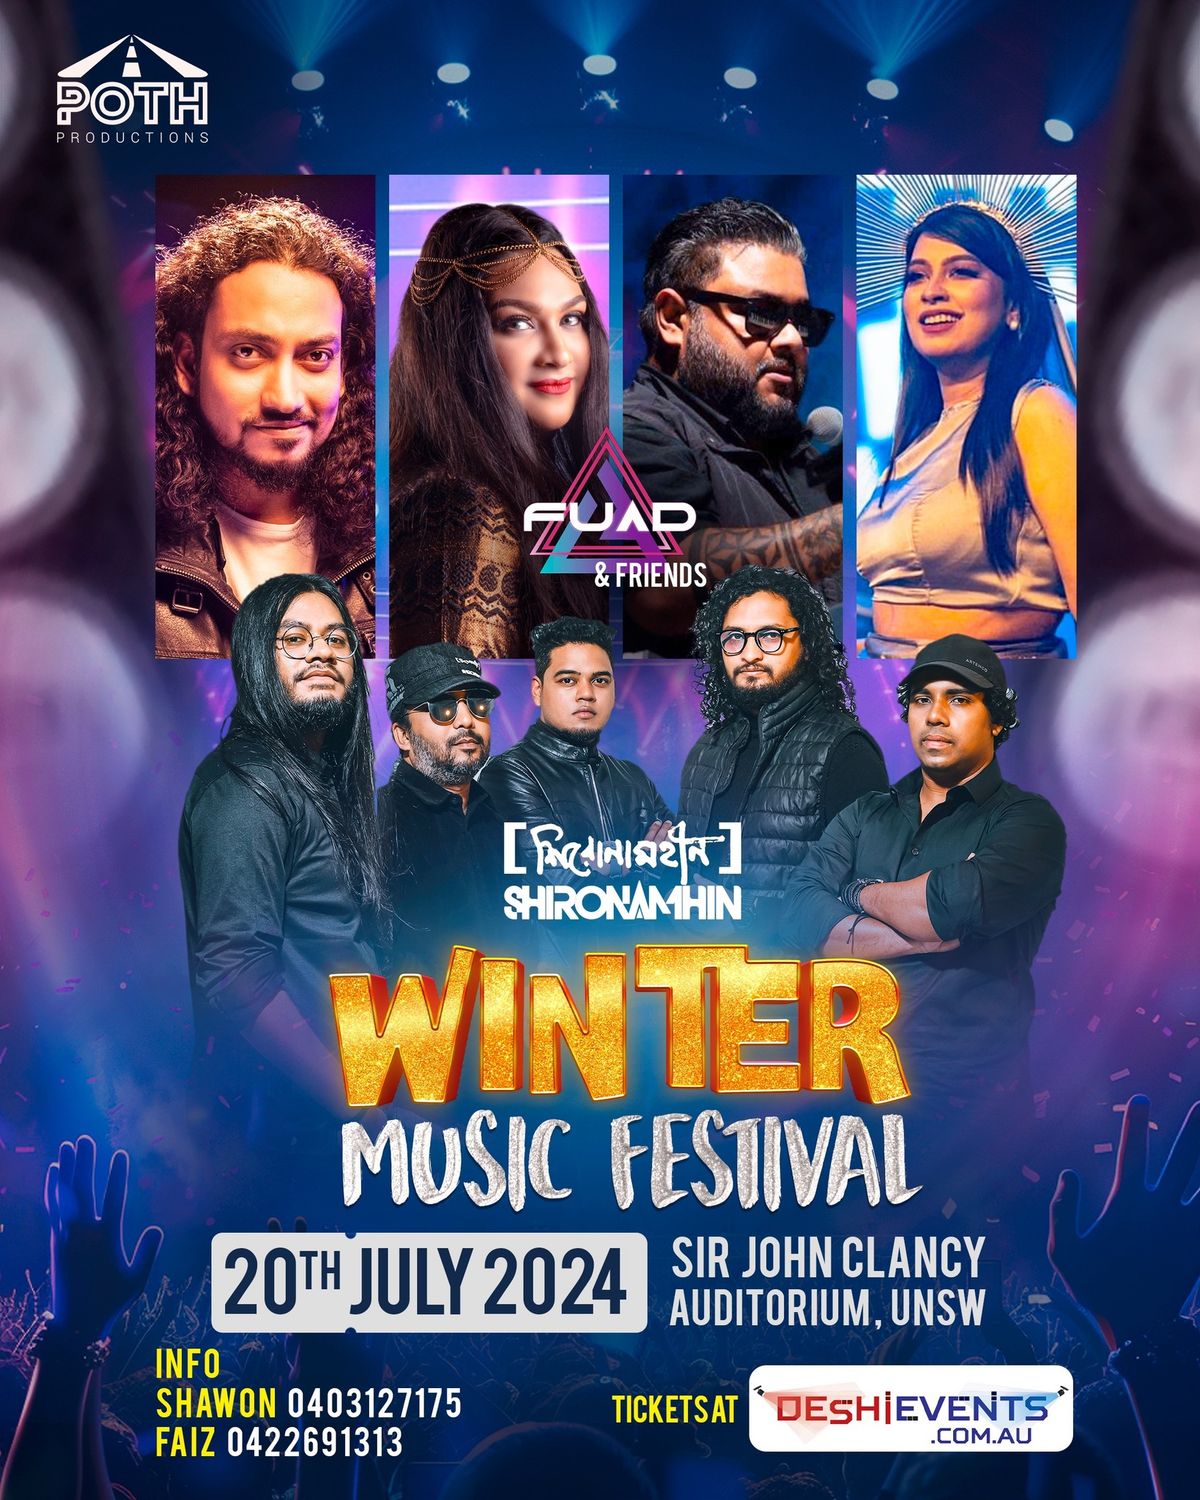 WINTER MUSIC FESTIVAL featuring FUAD N FRIENDS & \u09b6\u09bf\u09b0\u09cb\u09a8\u09be\u09ae\u09b9\u09c0\u09a8